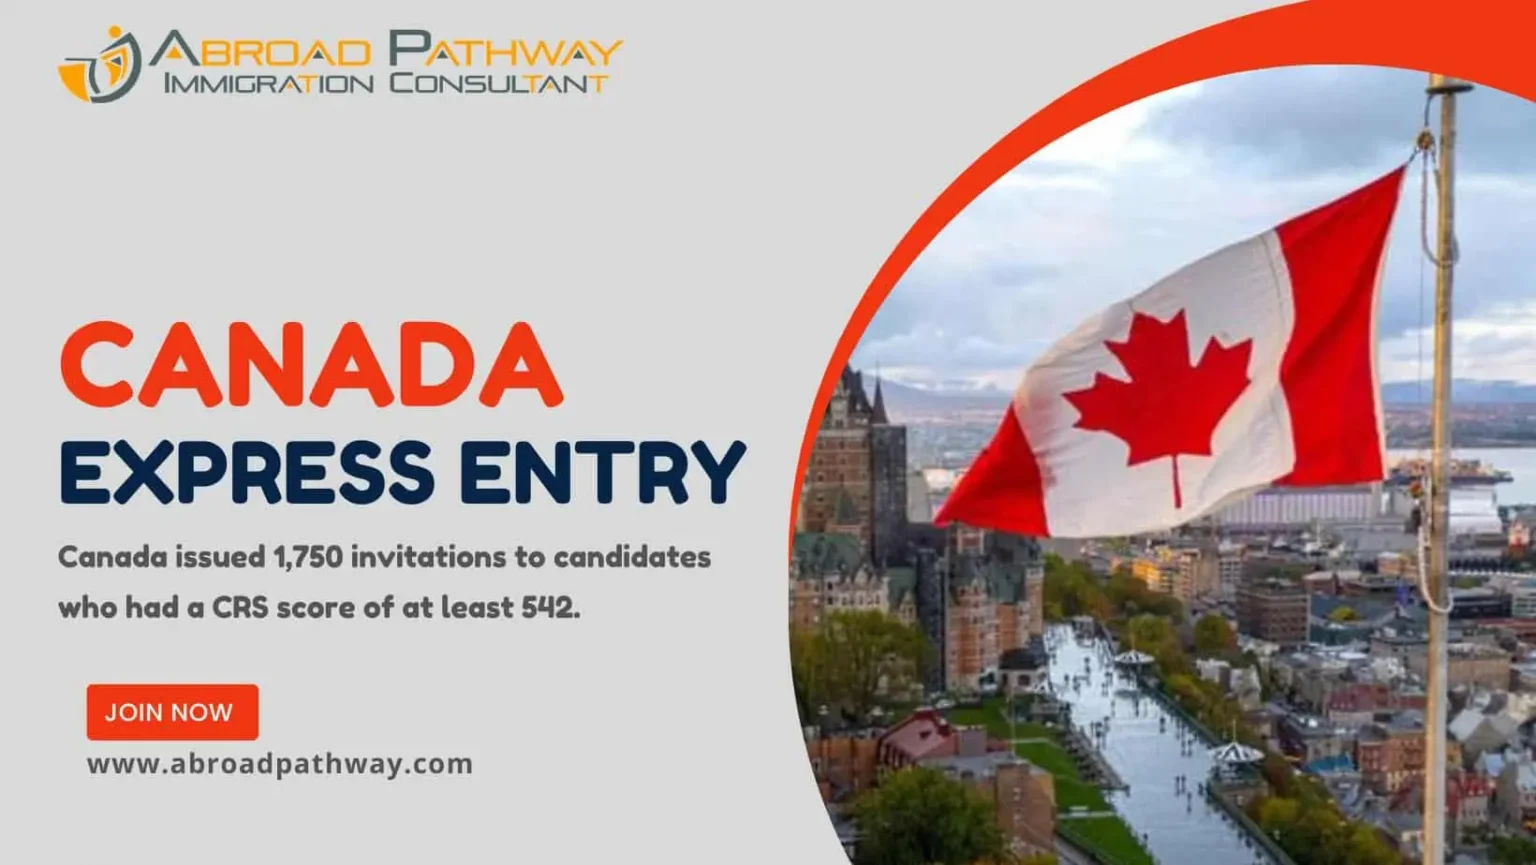 Canada Express Entry draw issued ITAs 1,750